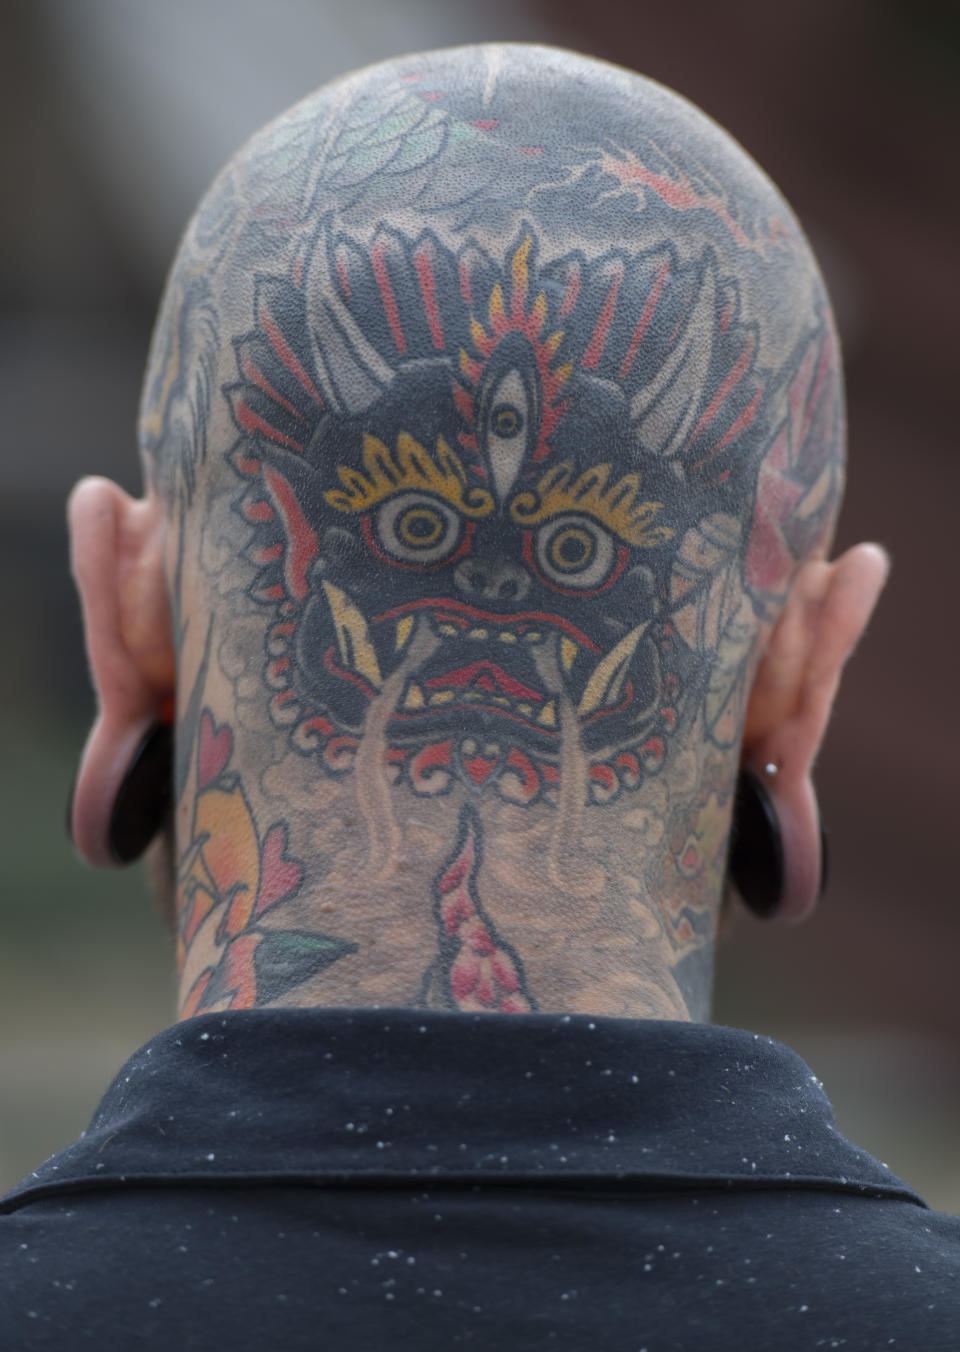 <p>A man’s tattooed head at the London Tattoo convention at Tobacco Dock on Sept. 23, 2017 in London, England. (Photo: James D. Morgan/Getty Images) </p>